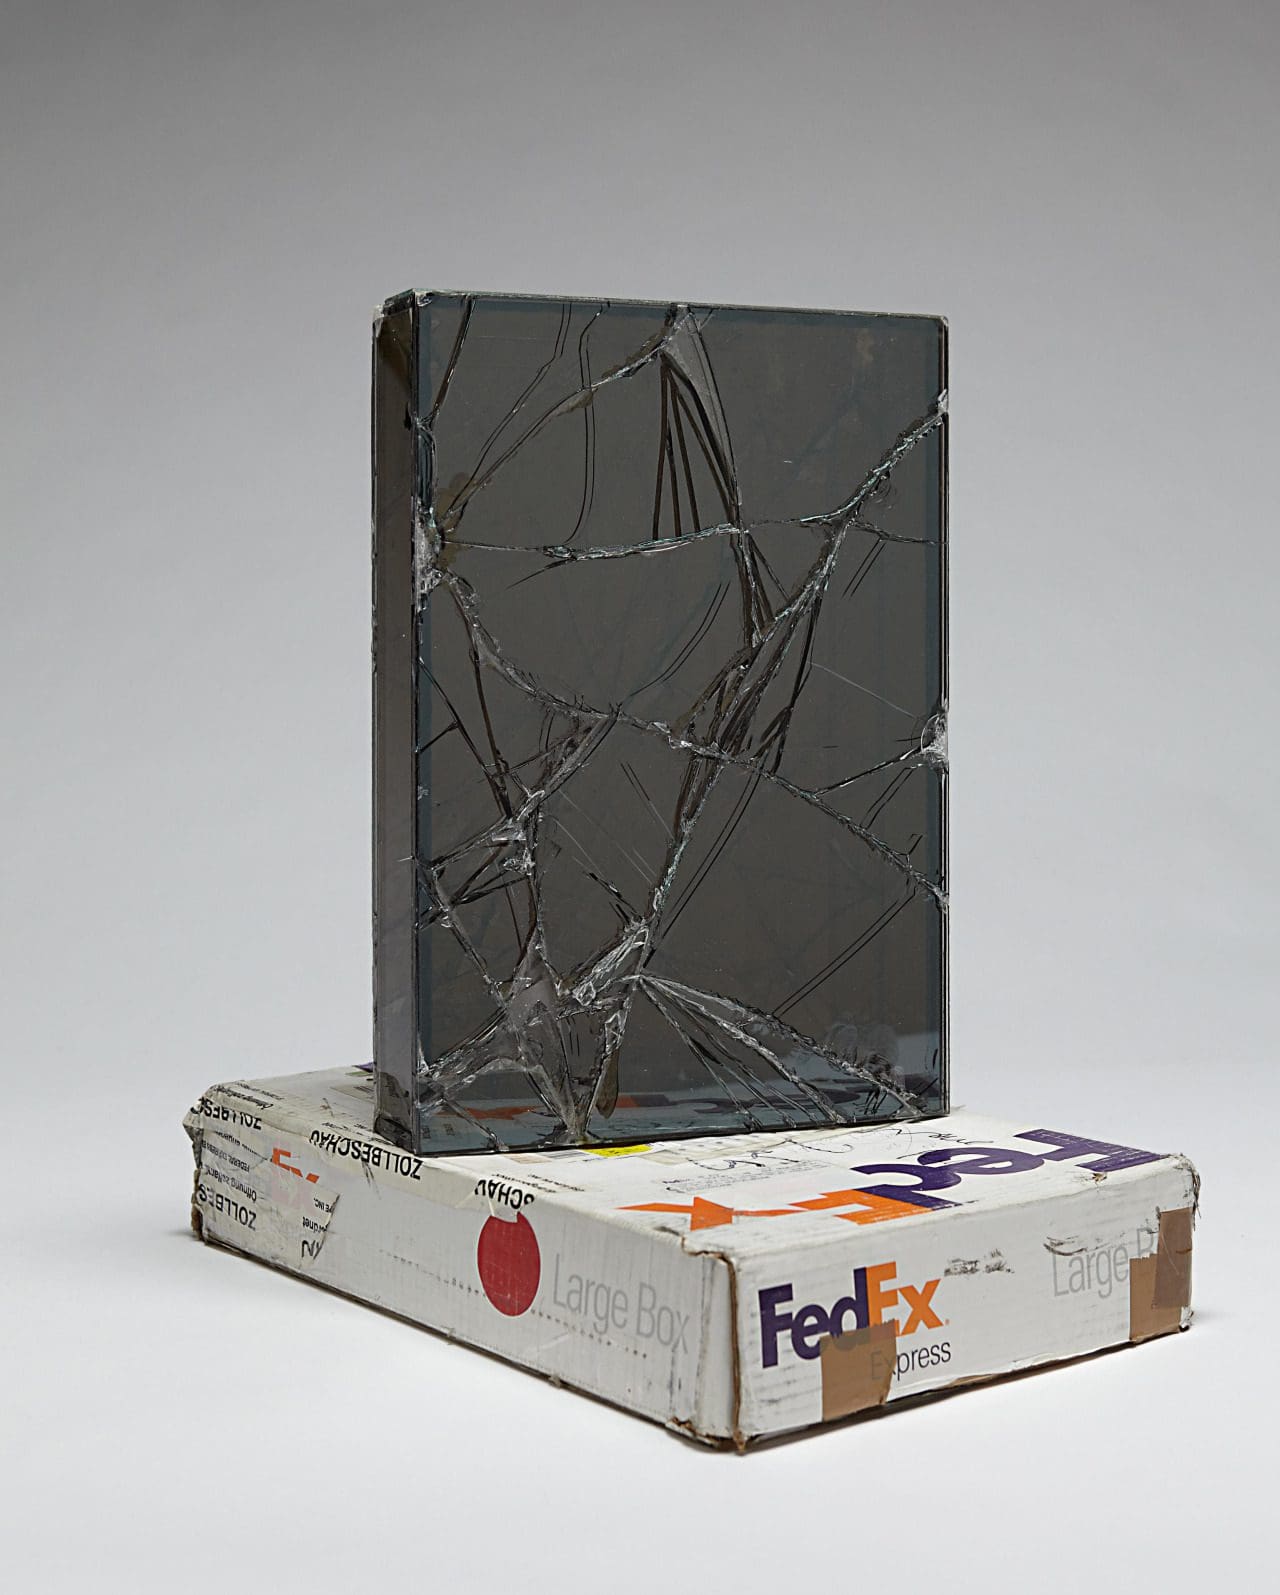 Artist Walead Beshty Shipped Glass Boxes Inside FedEx Boxes to Produce Shattered Sculptures